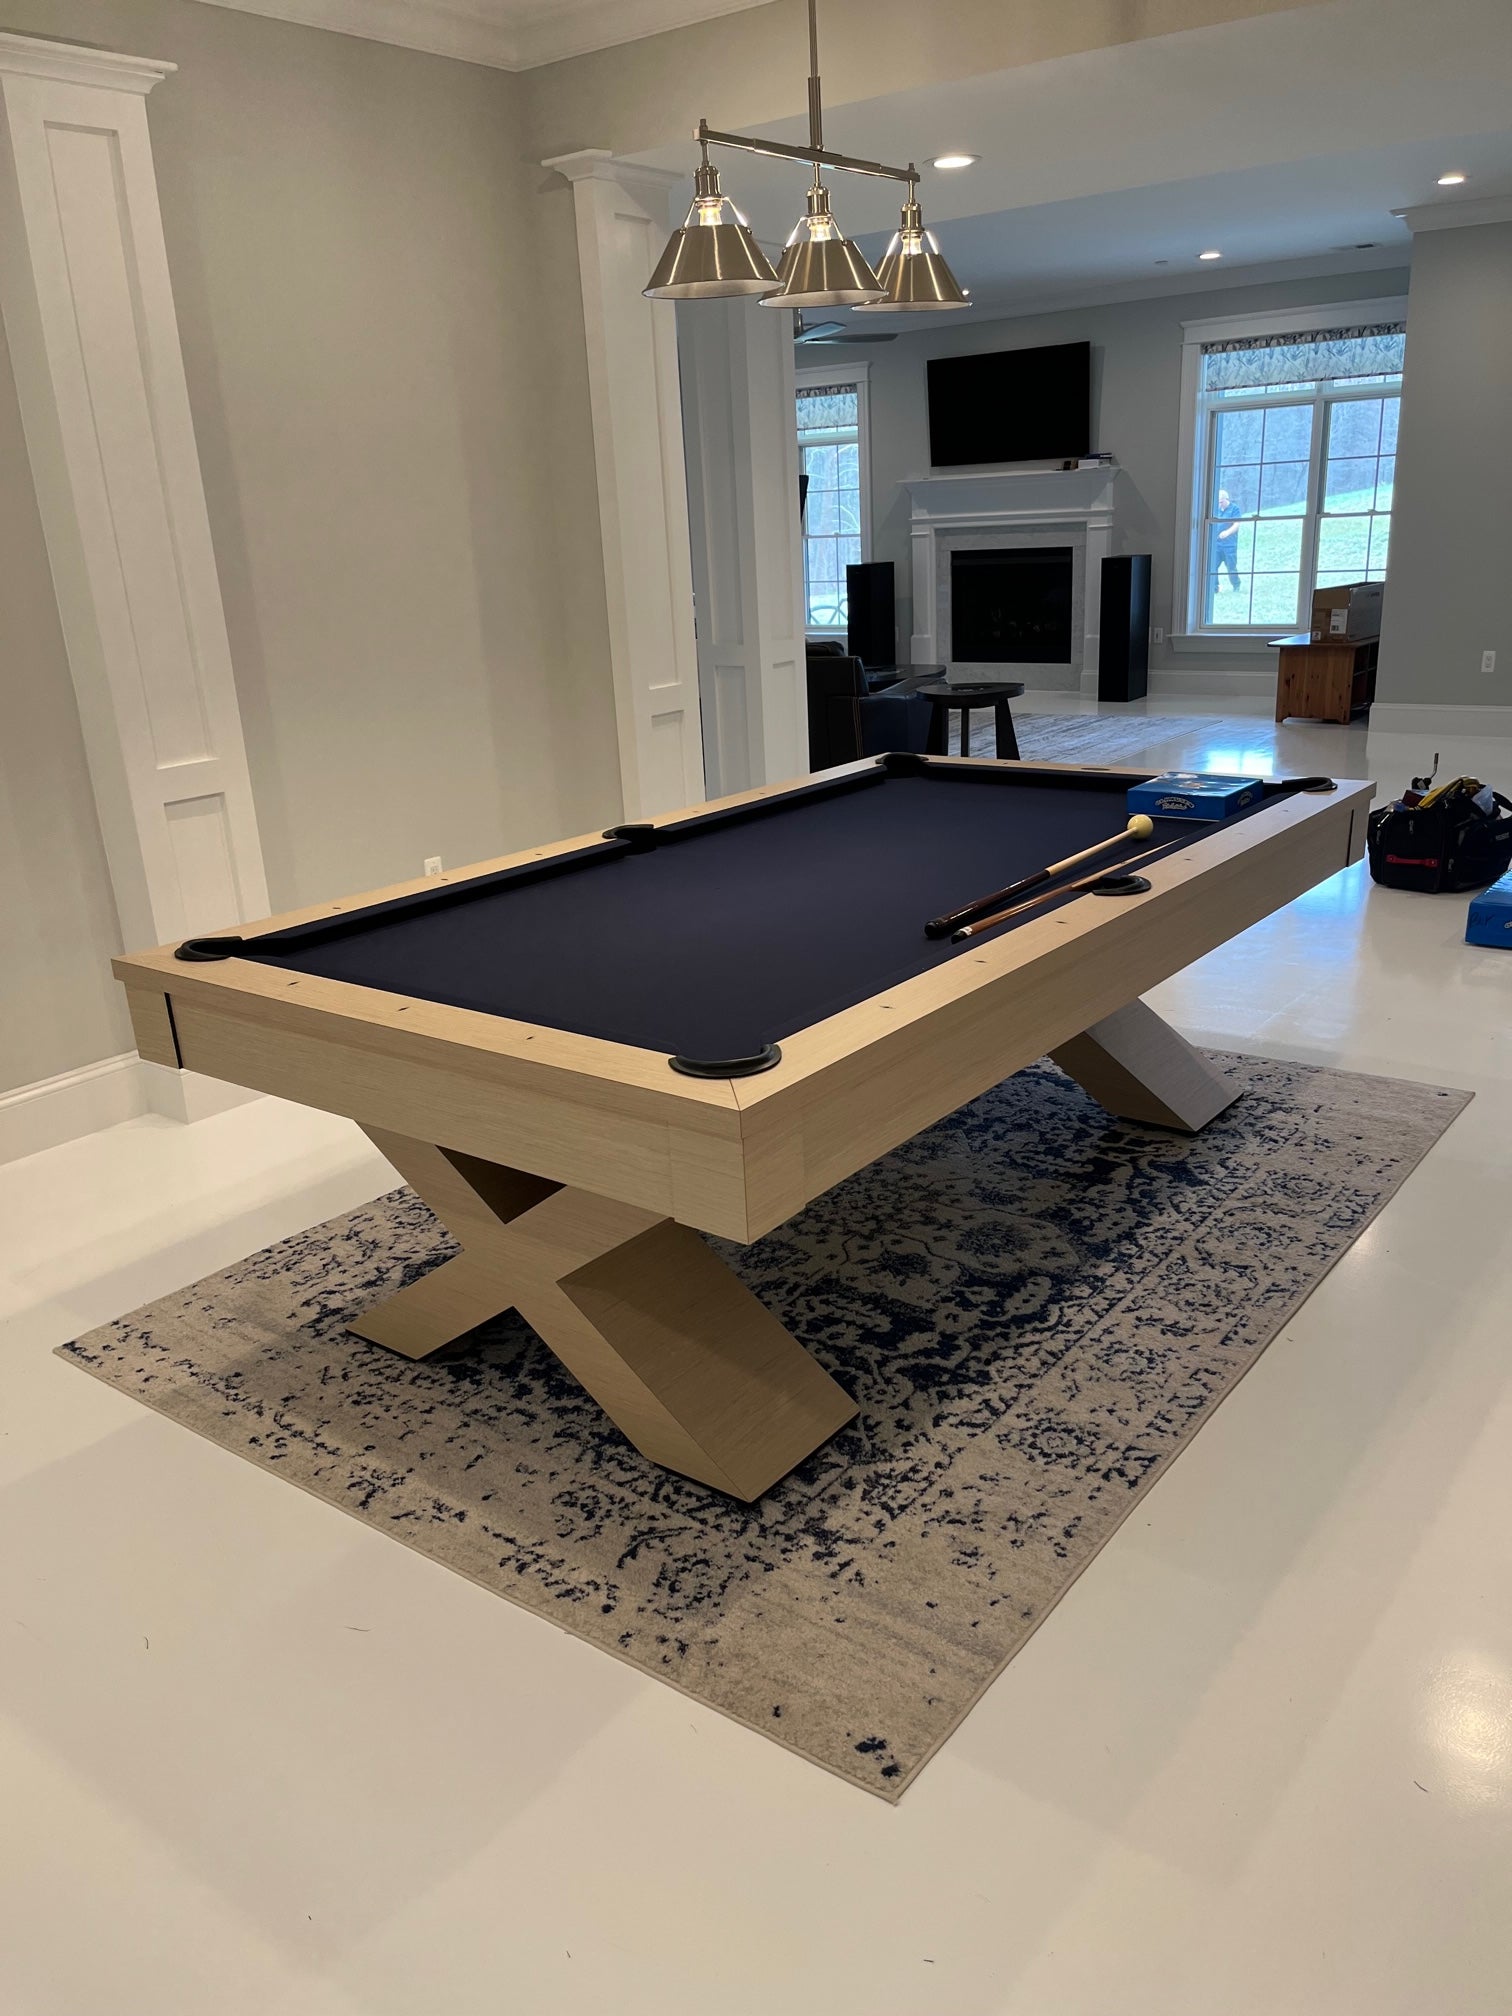 Olhausen Encore Pool Table installed in Fulton Maryland